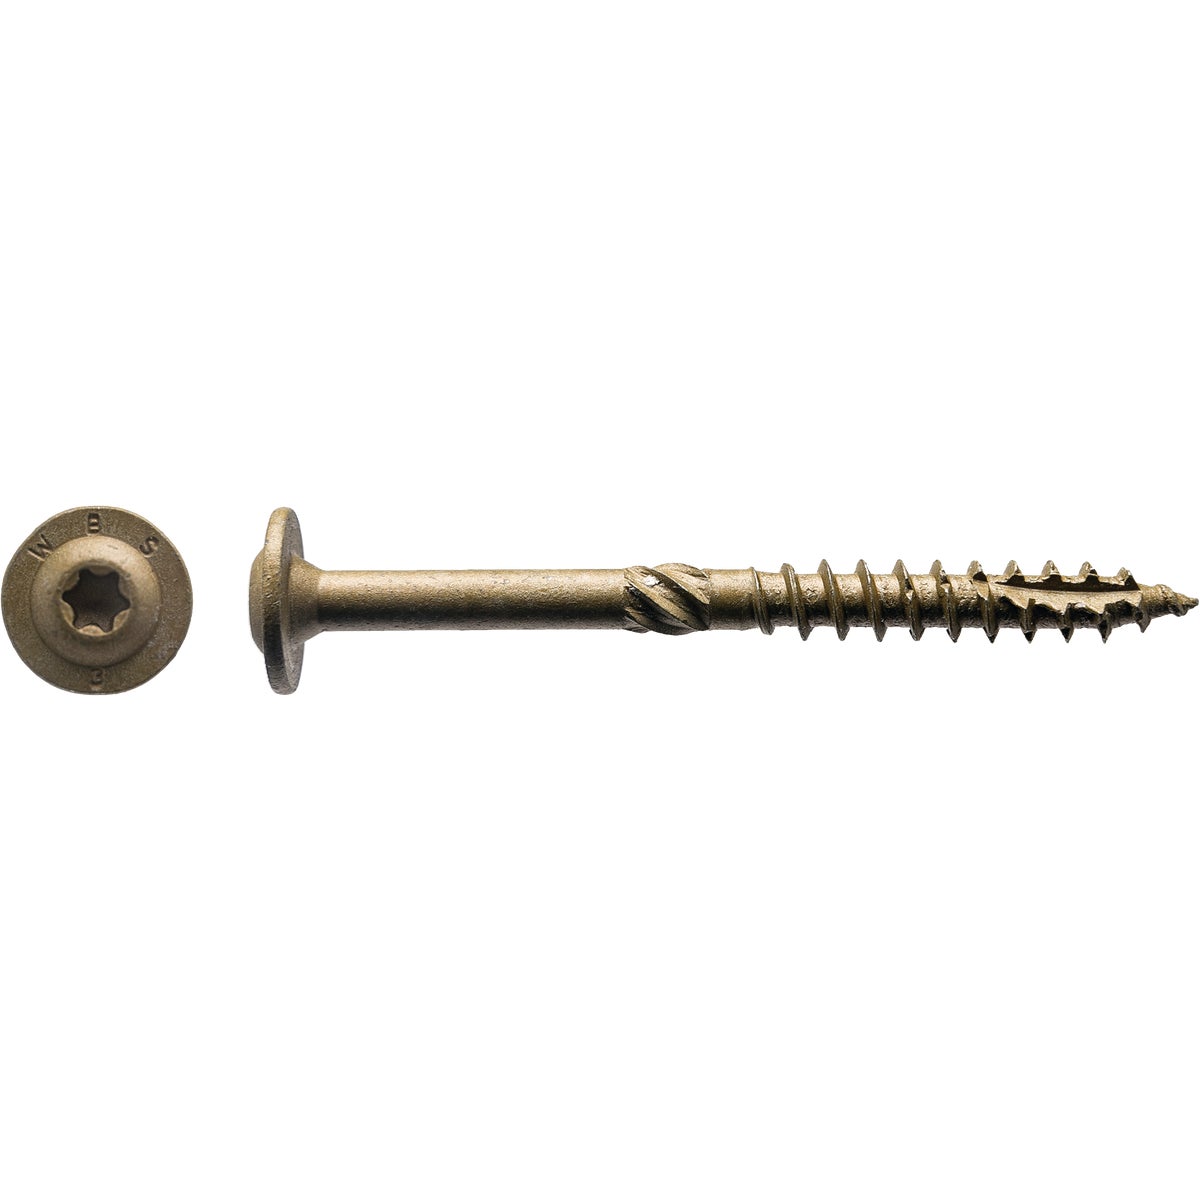 Big Timber #15 x 3 In. Structure Screw (500 Ct.)